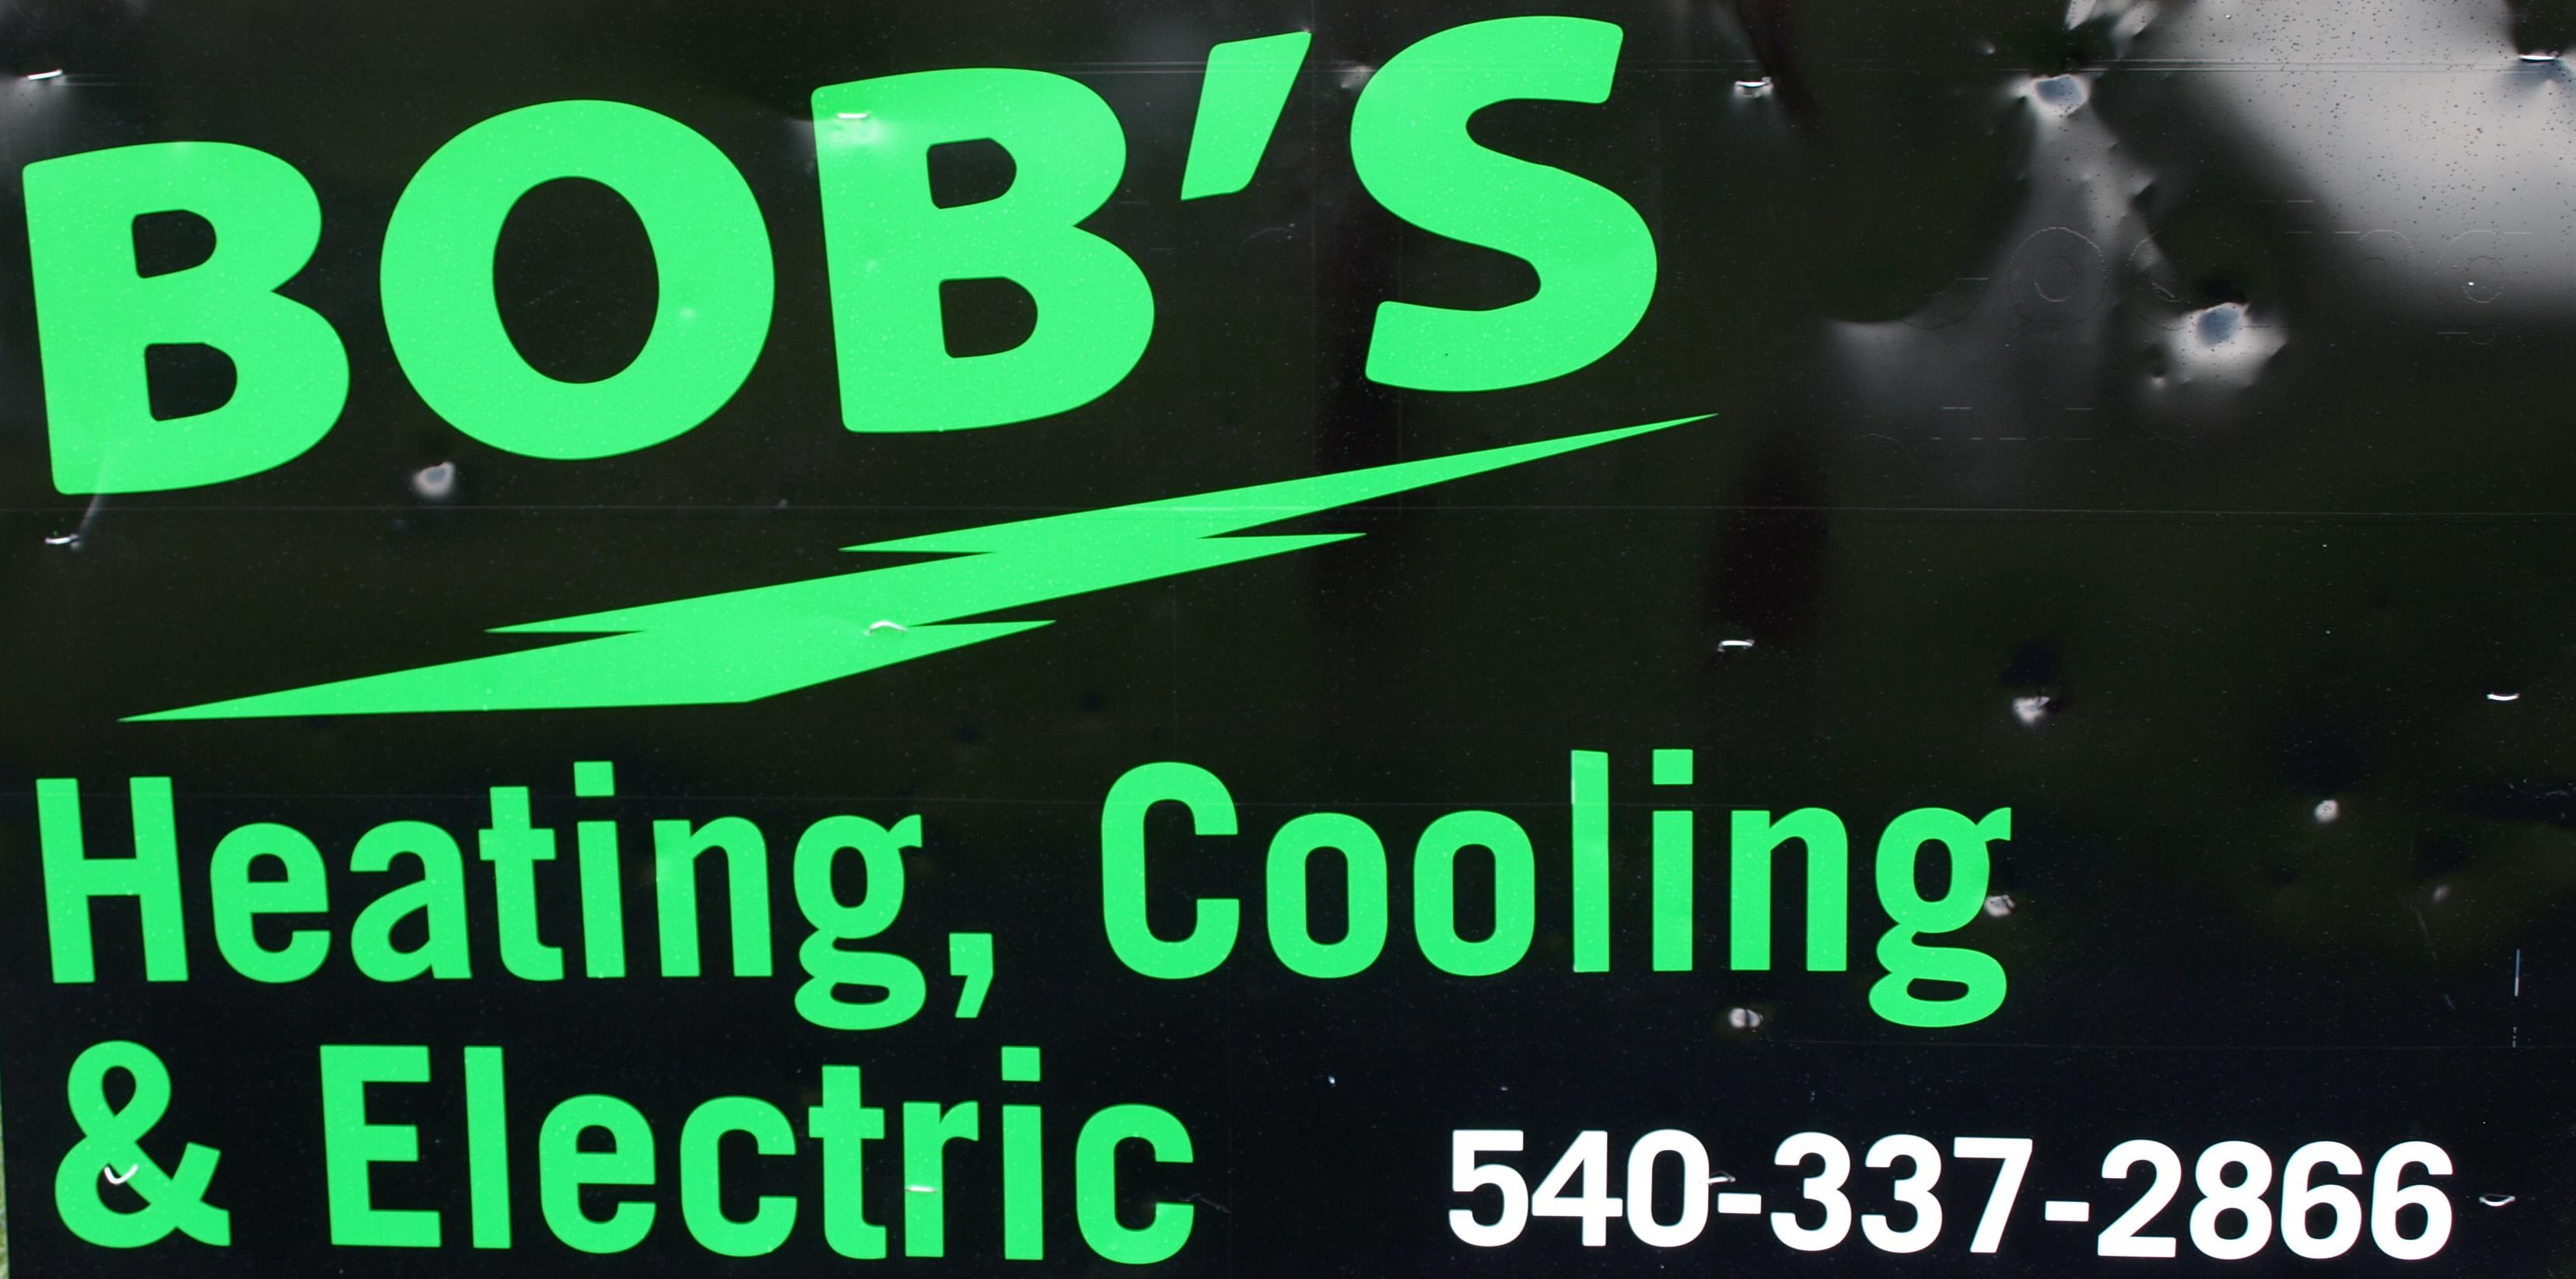 Bob's Heating, Cooling & Electric